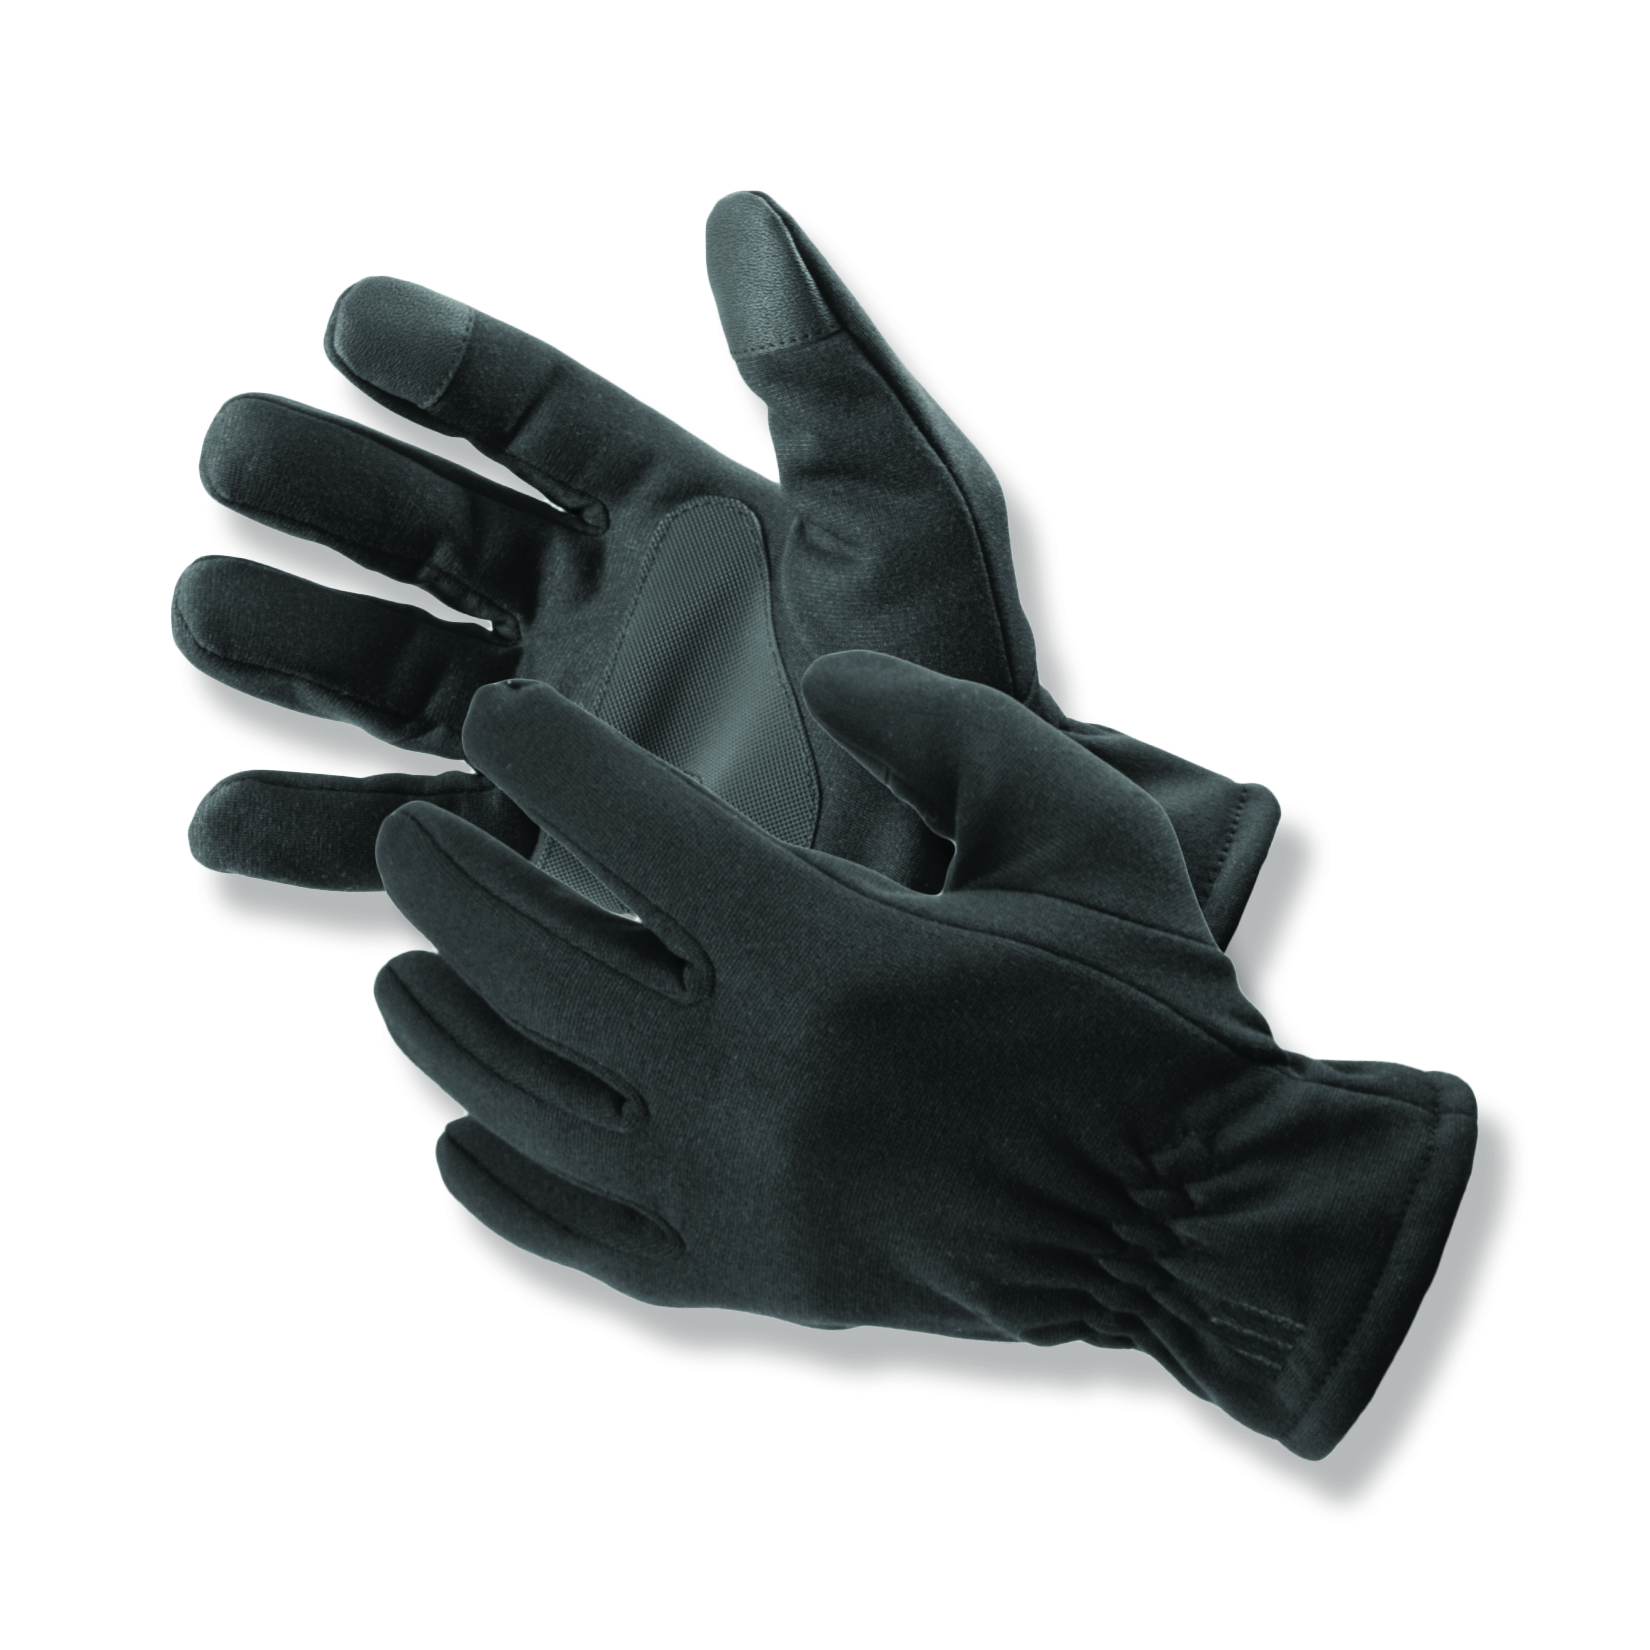 4-Way Stretch Micro Fleece TS™ Cold Weather Uniform Gloves have synthetic palm patches and are touchscreen compatible.